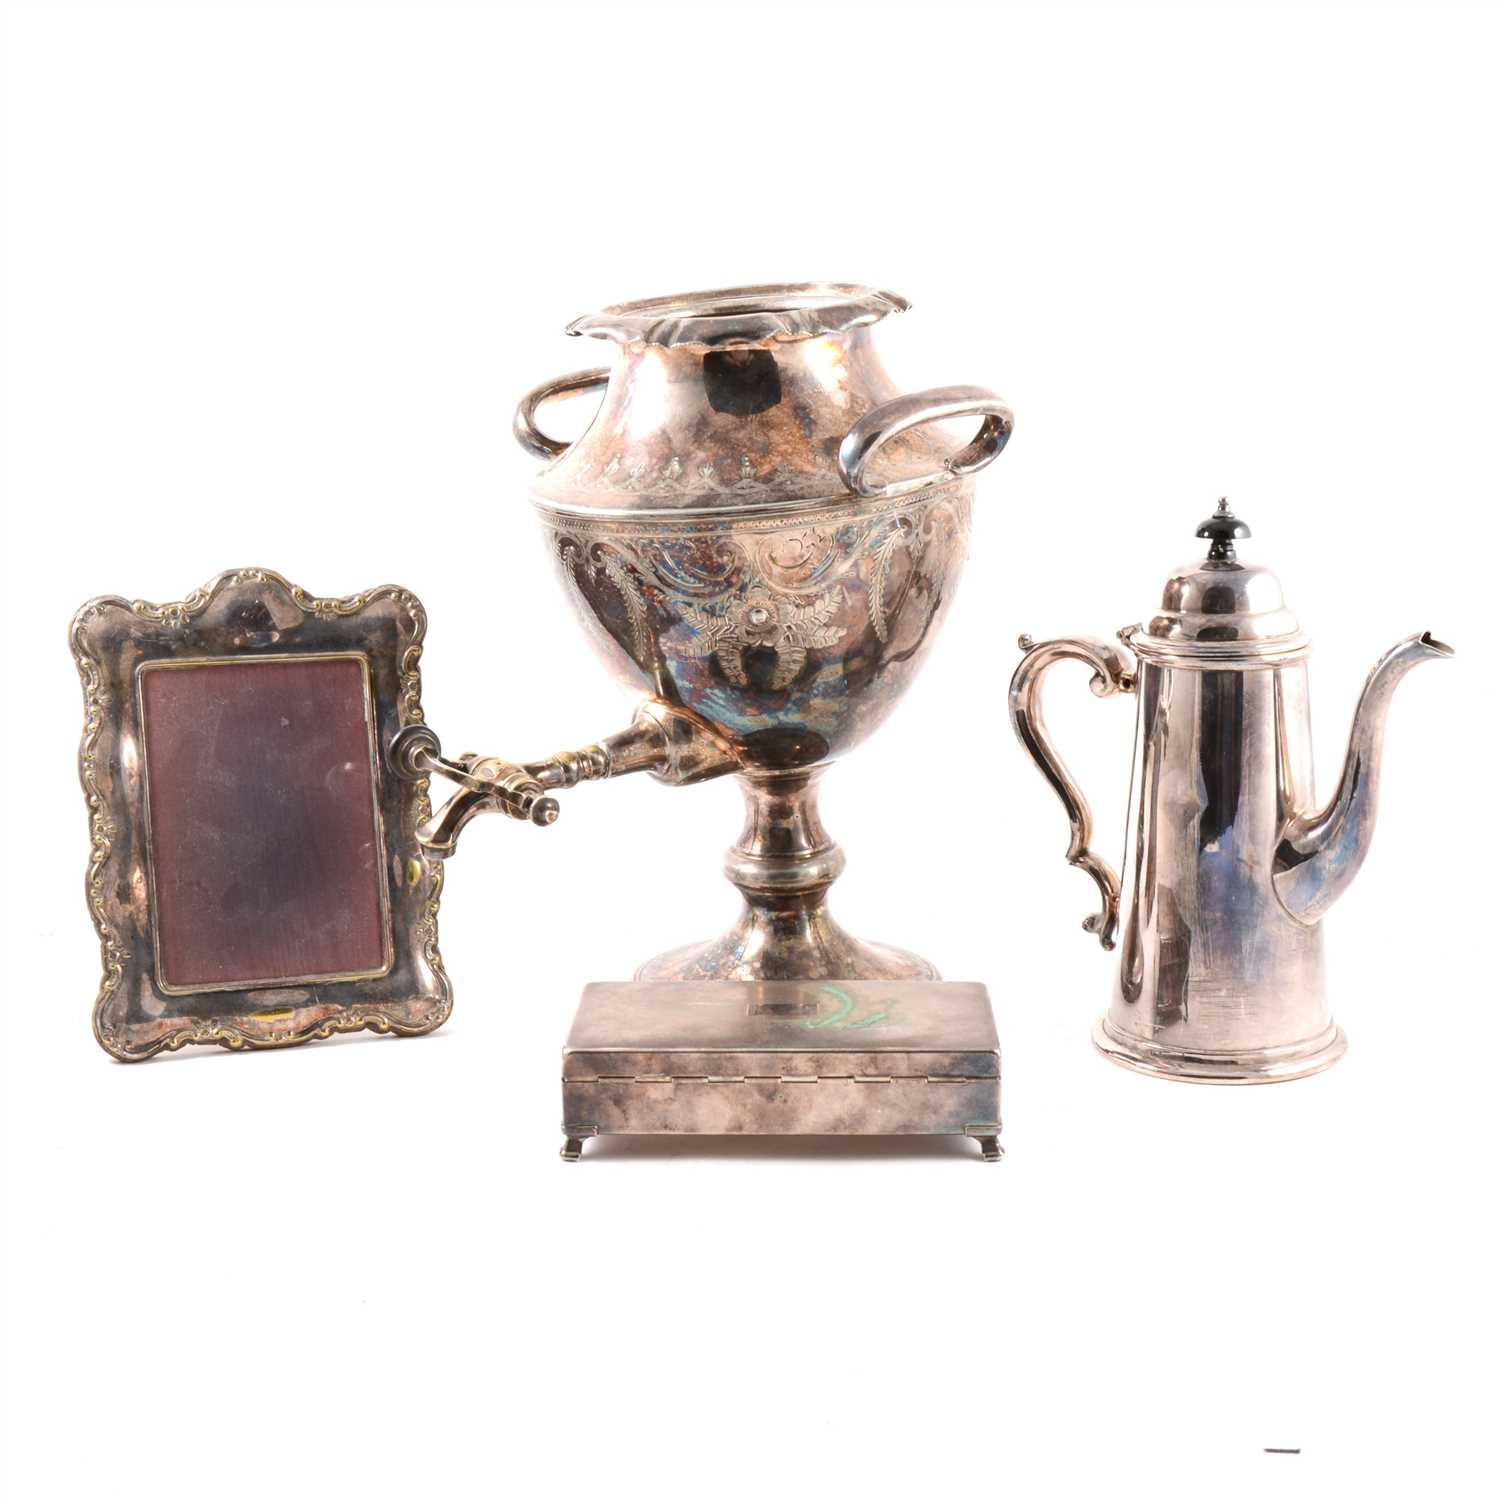 Lot 118 - A collection of ceramics and plated wares, to include a tea urn, salver, salts, cigar box